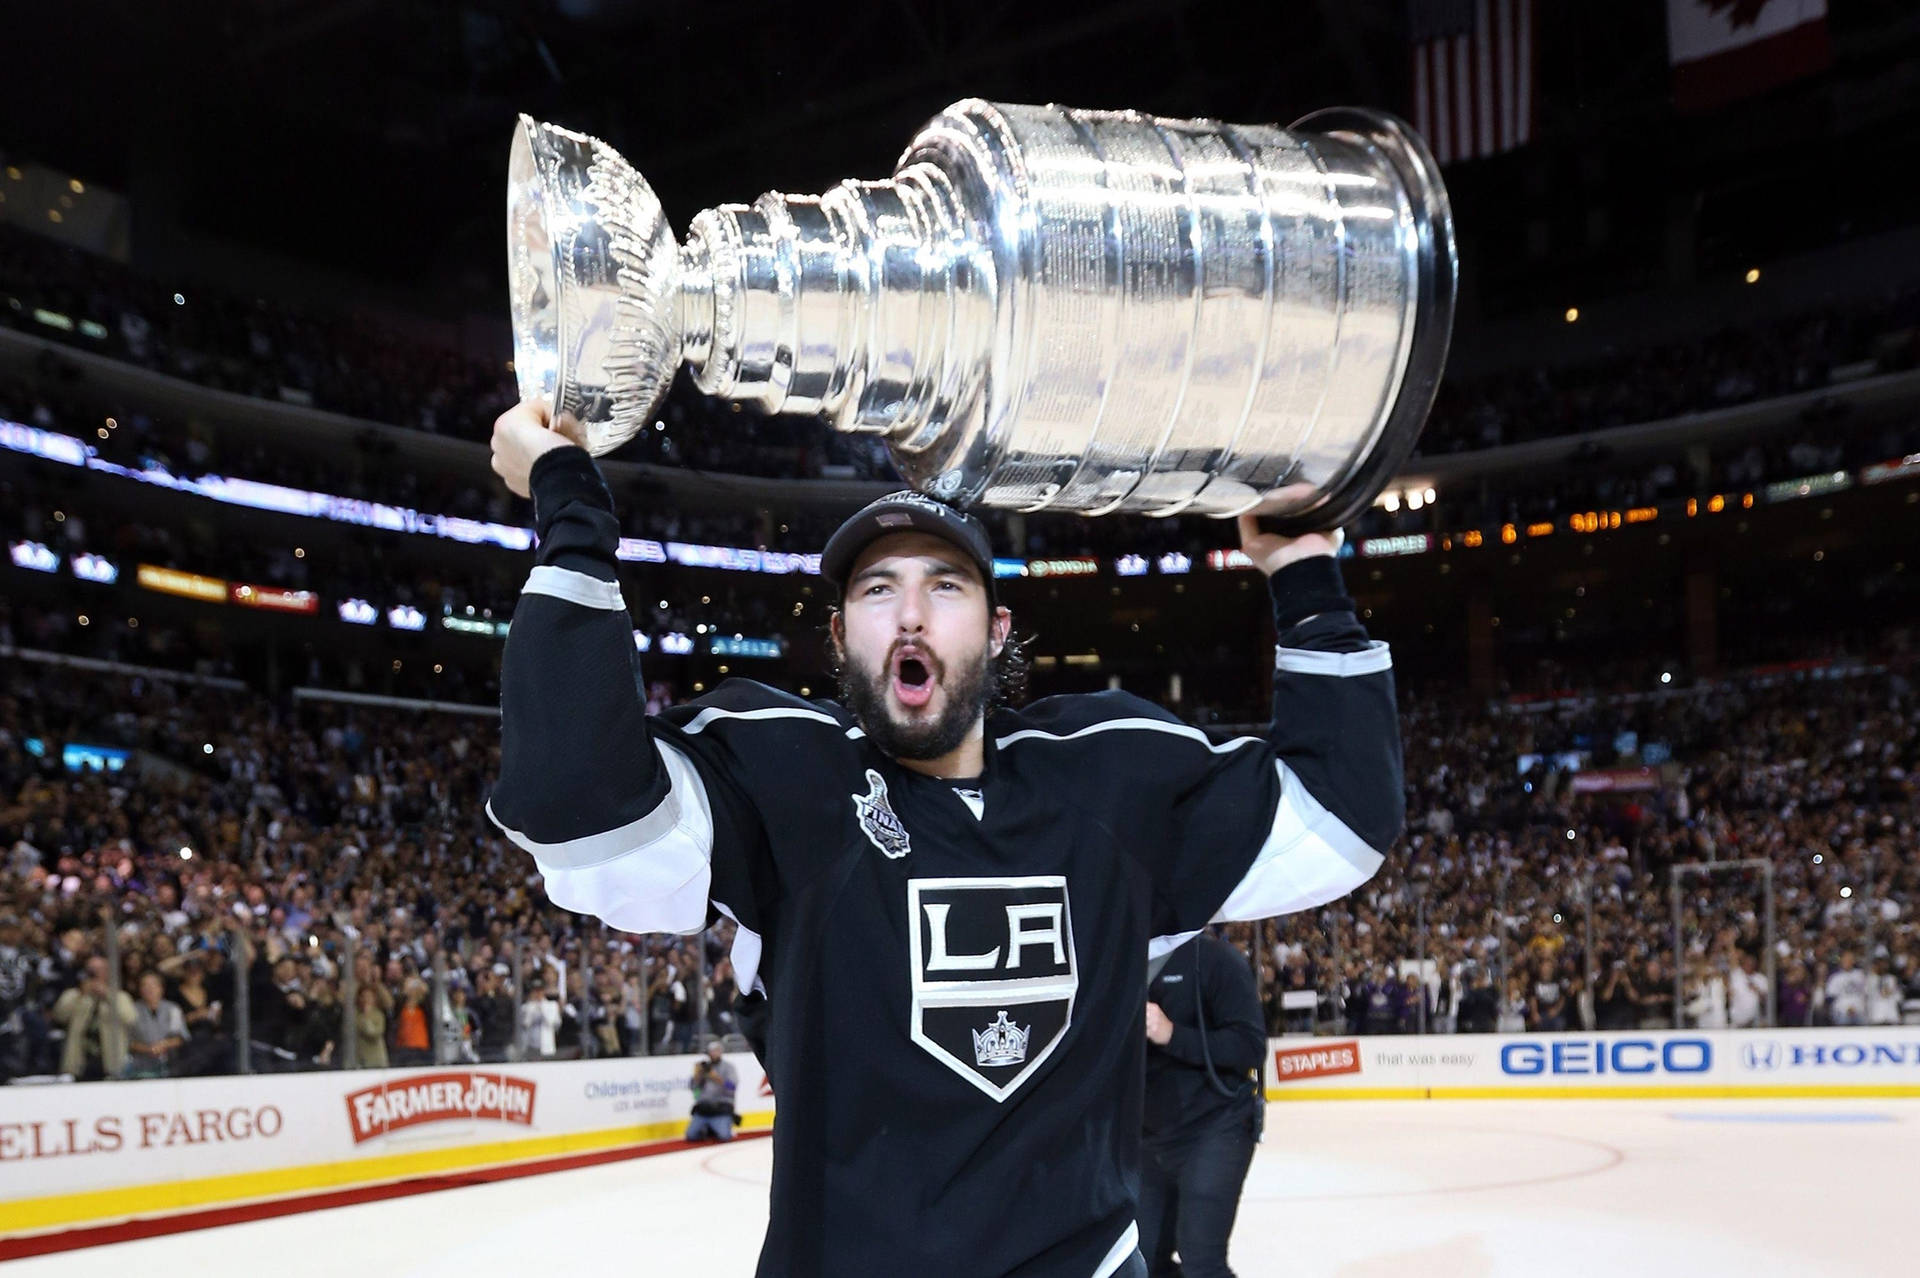 Drew Doughty & Jonathan Quick with the Stanley Cup Trophy after